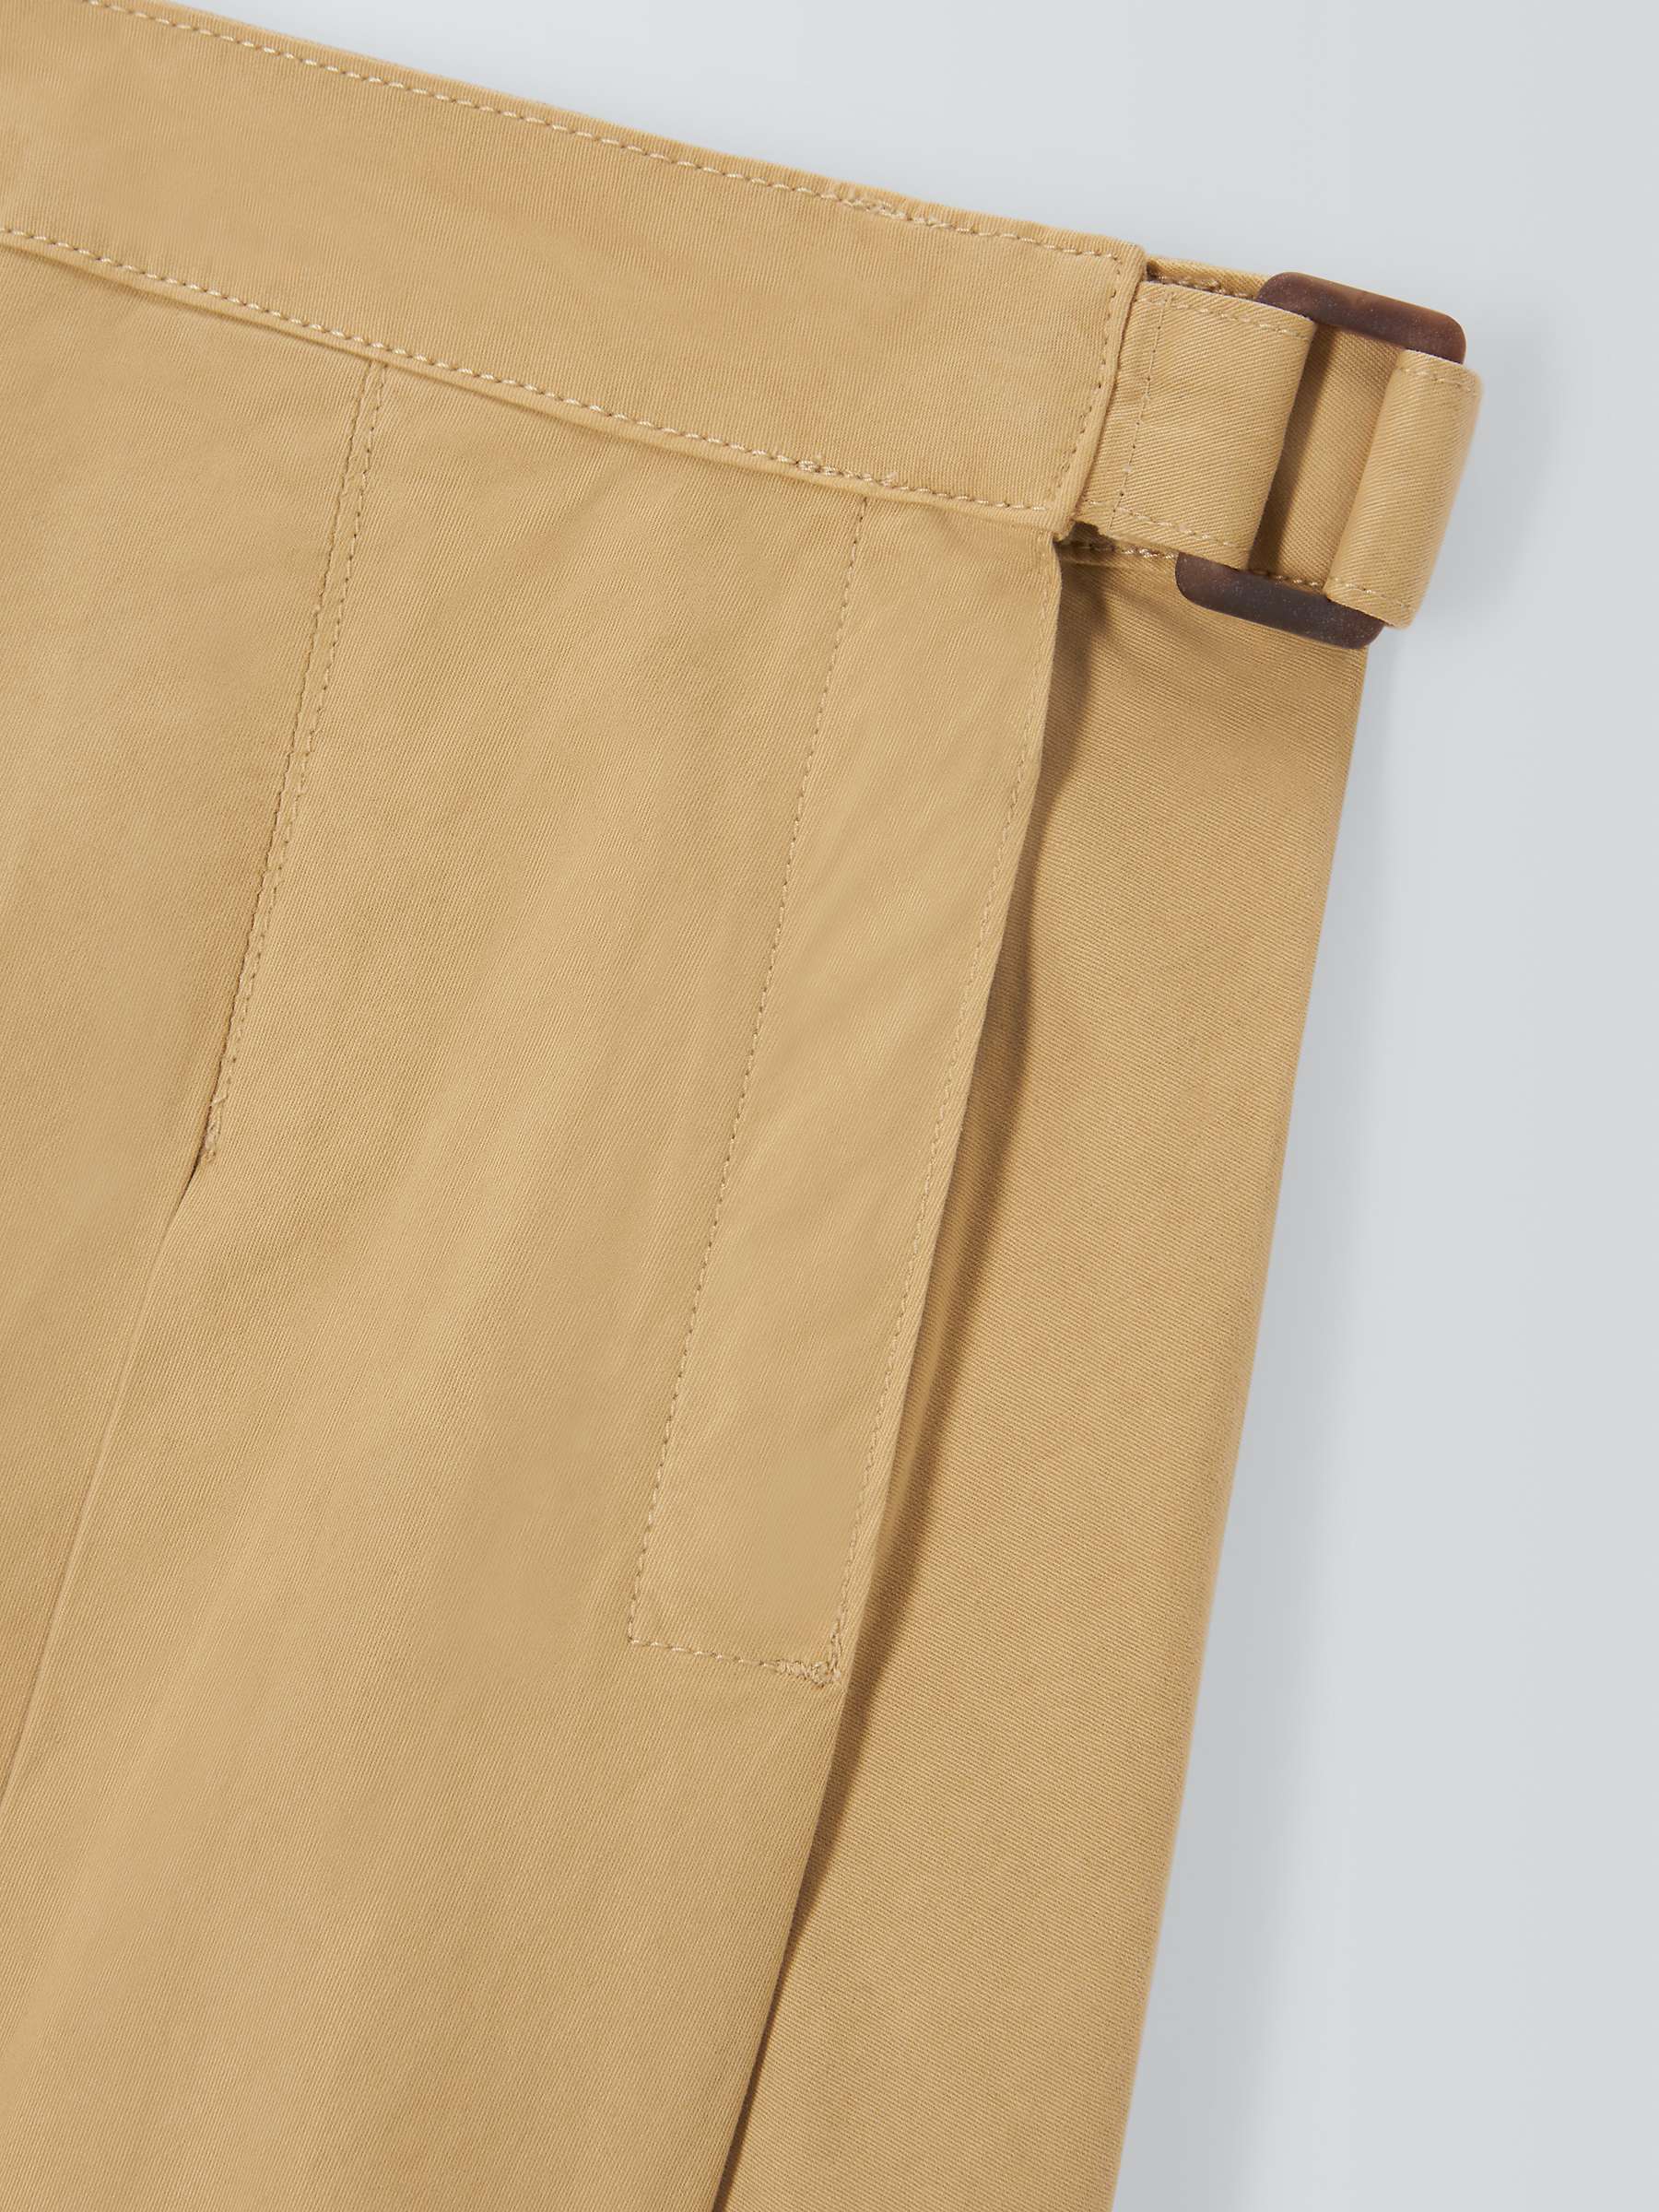 Buy John Lewis Cotton Twill Pleated Skirt, Taos Taupe Online at johnlewis.com